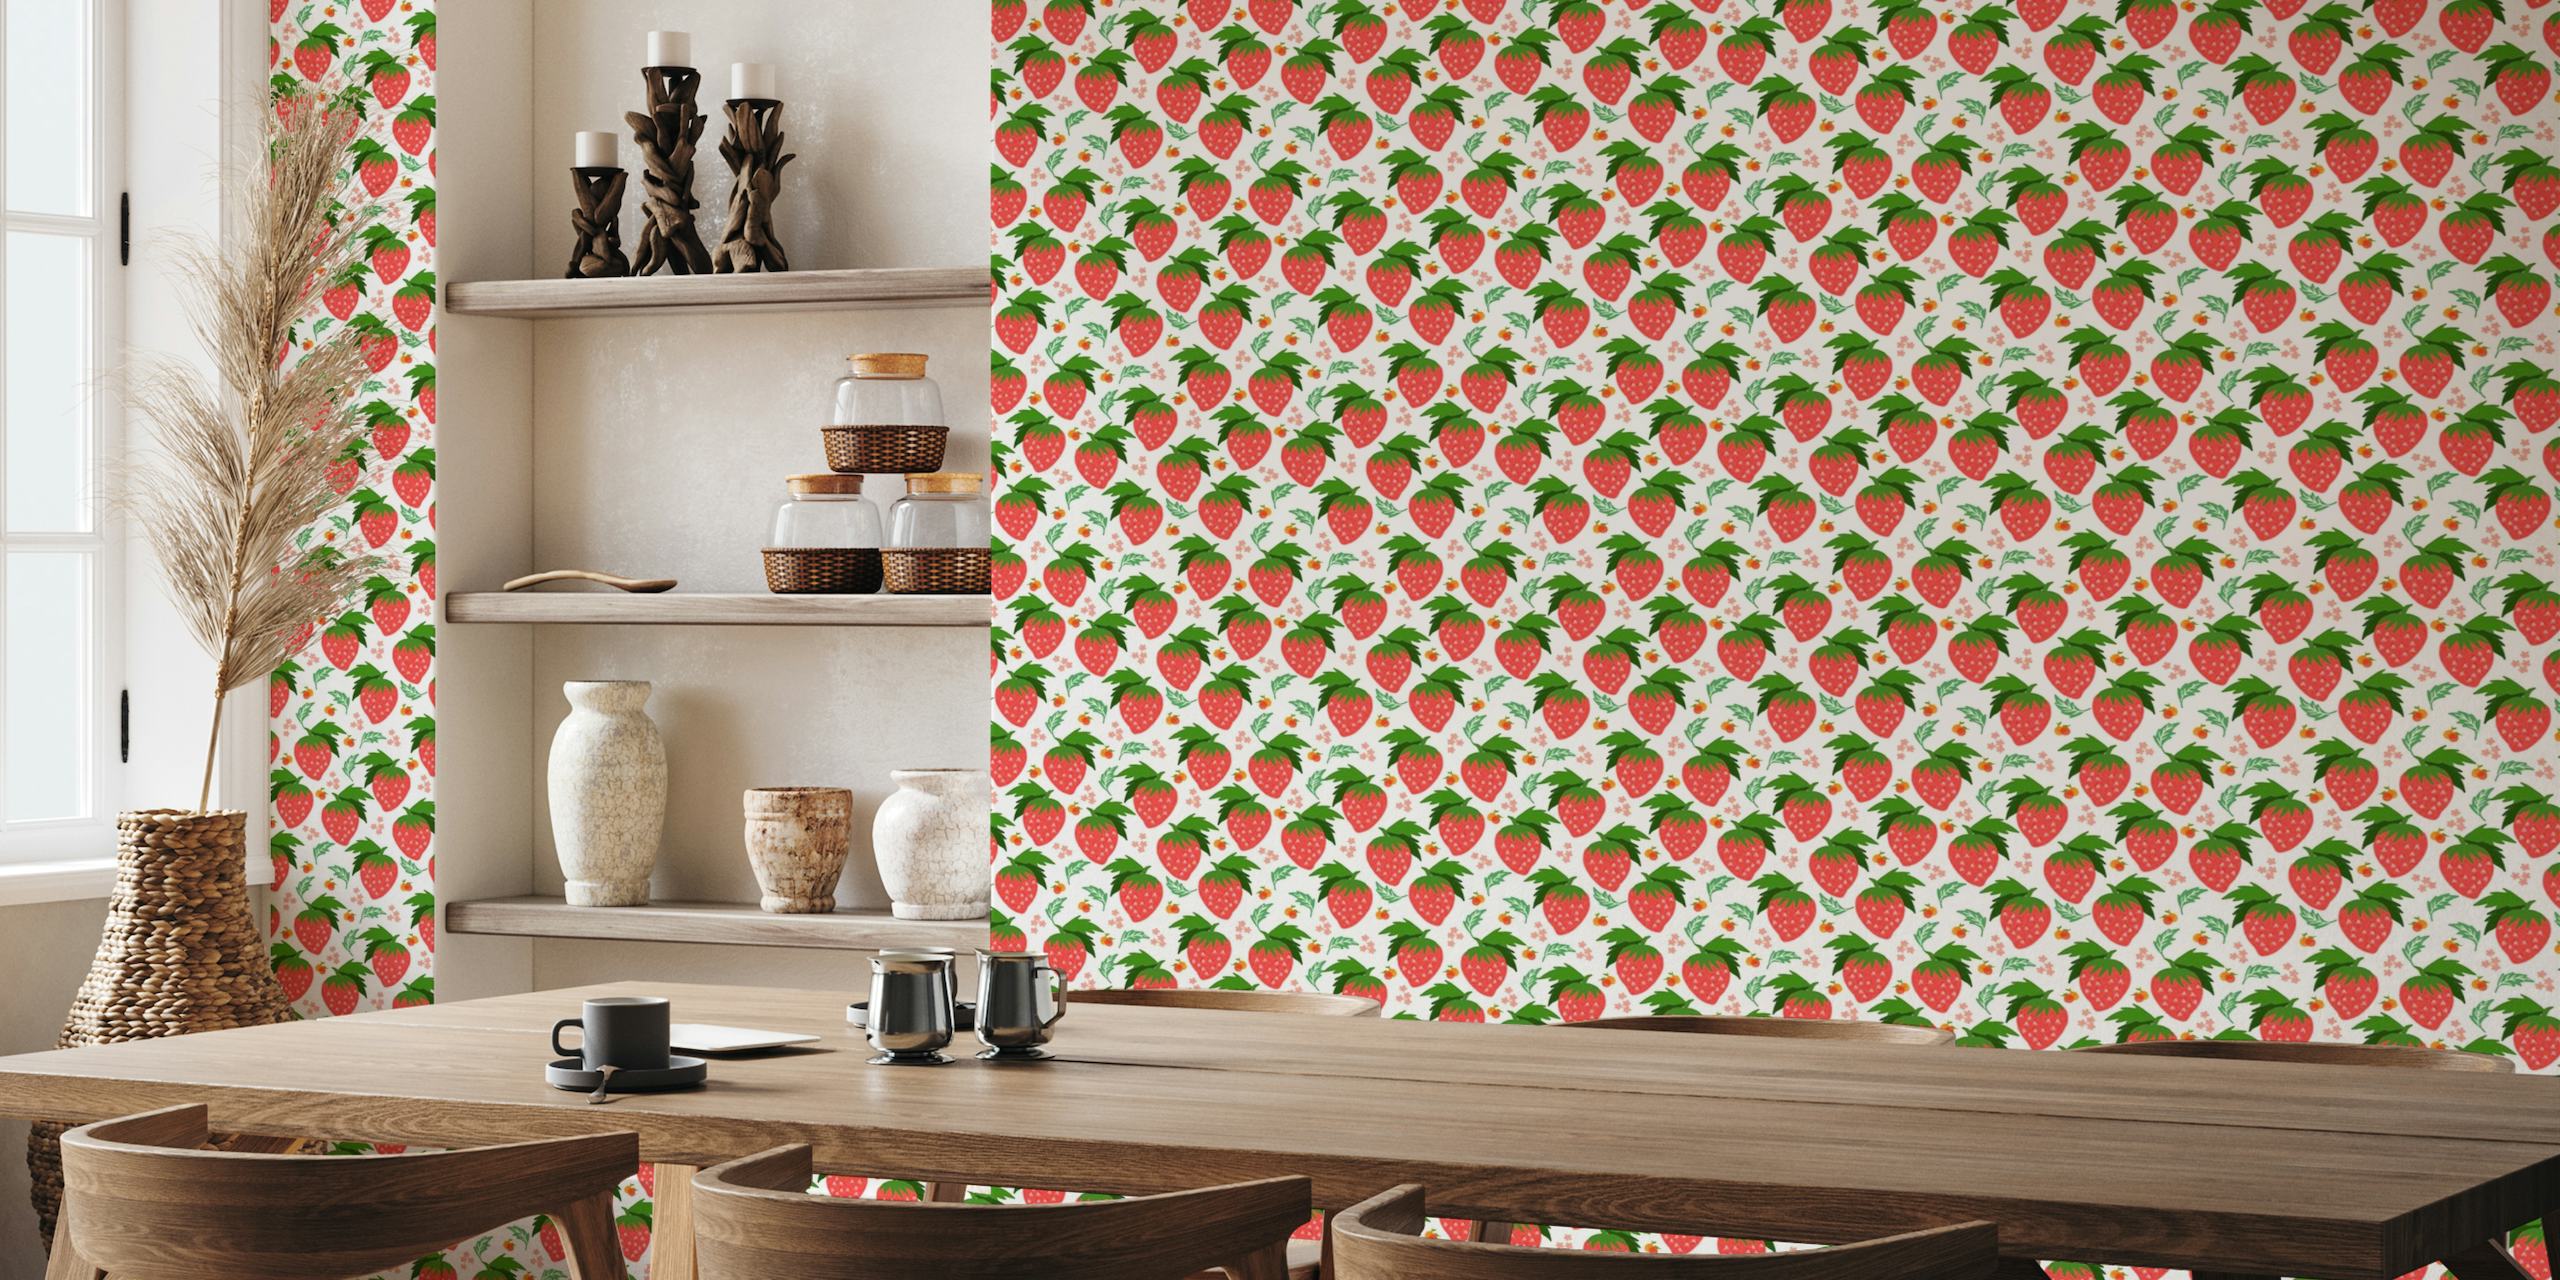 Strawberries fruit tropical pattern on a white background wallpaper